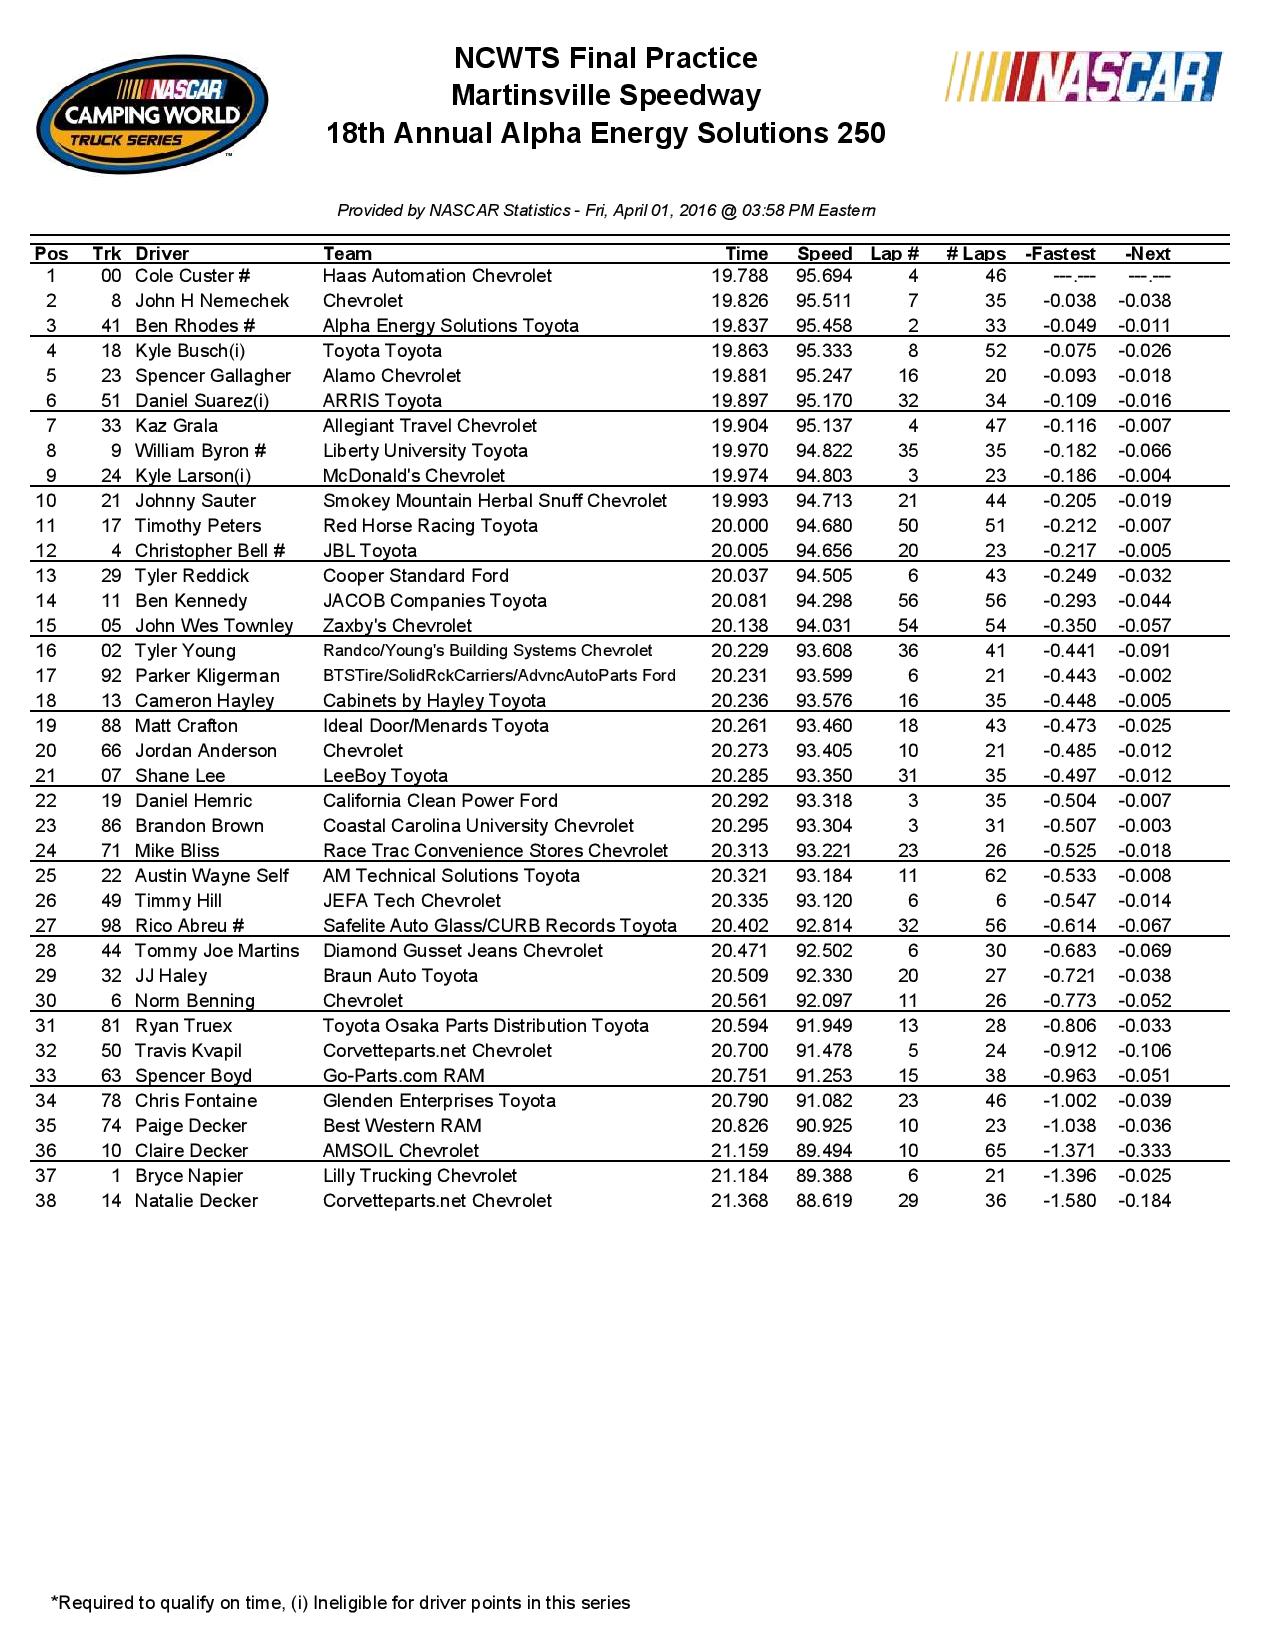 Martinsville NCWTS-FInal-page-001